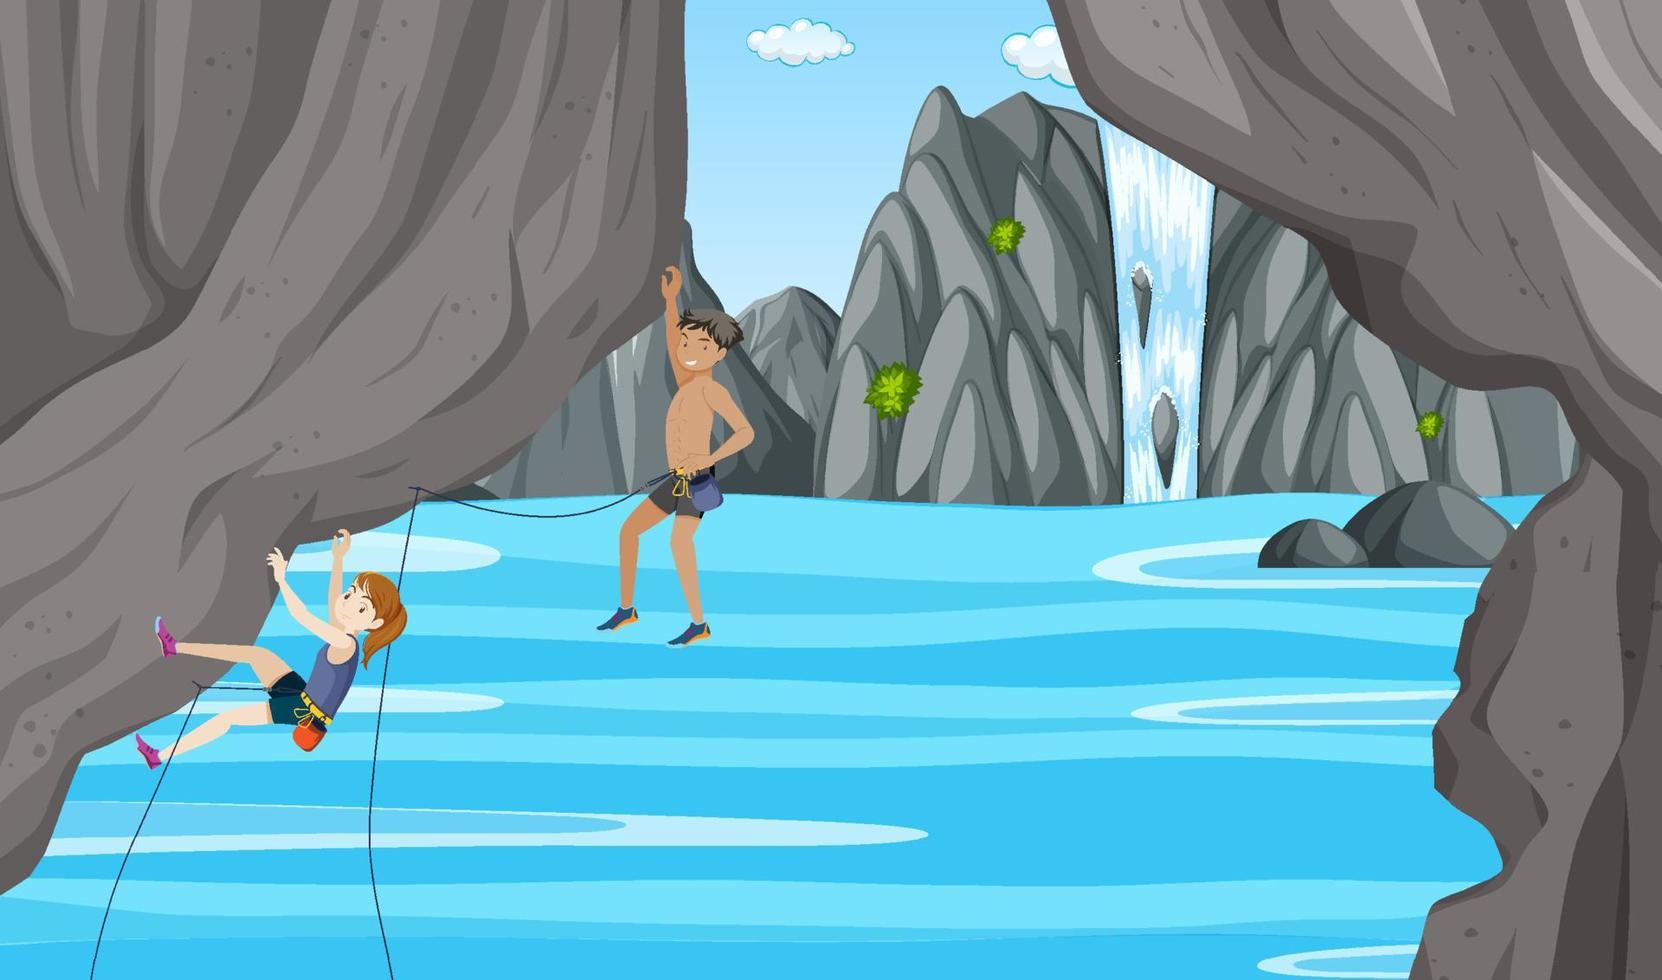 Outdoor scene with rock climber on cliff vector